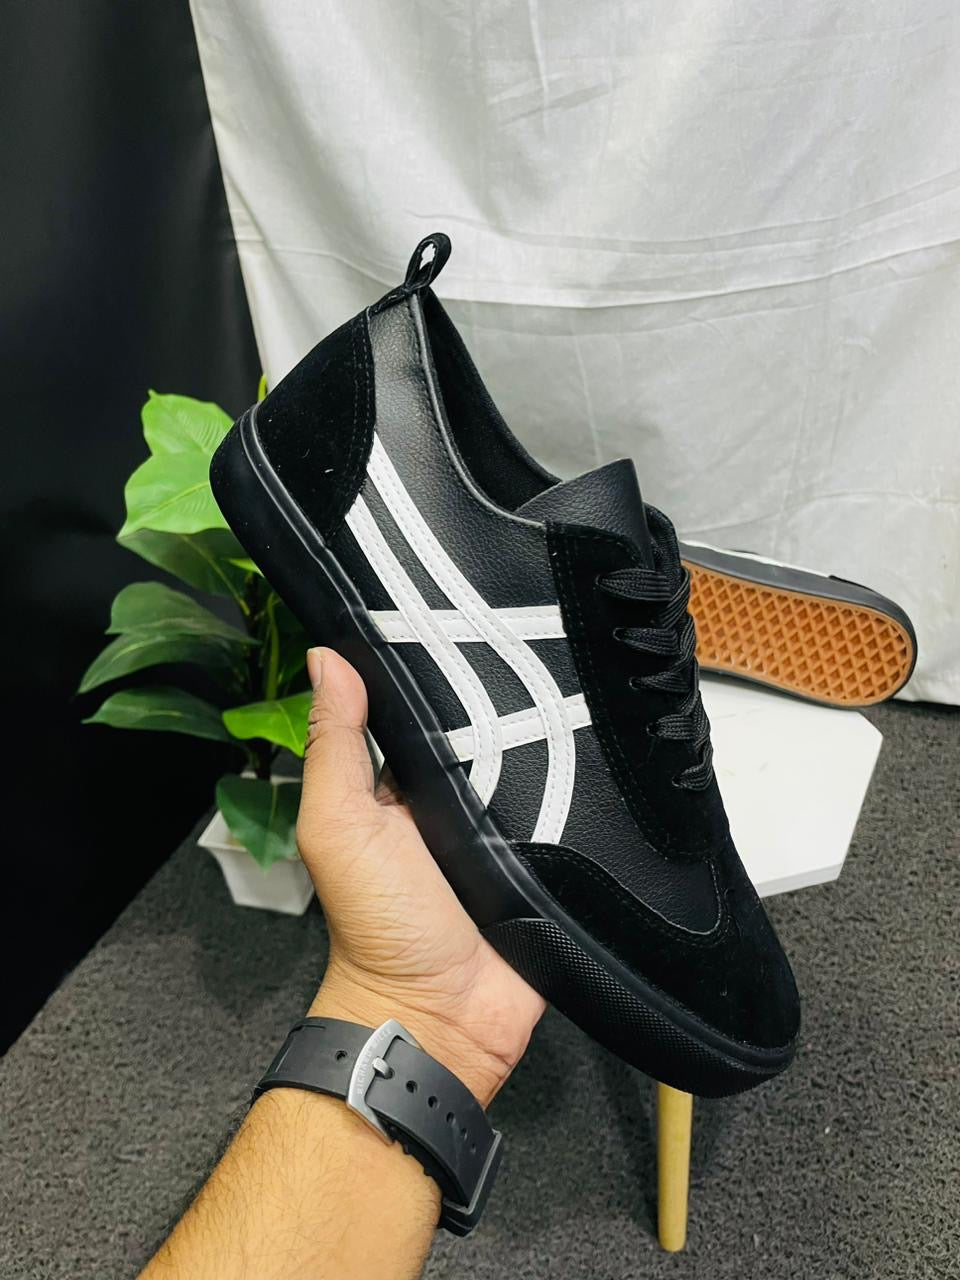 New Black Sneakers With White Stripes Canvas Shoes